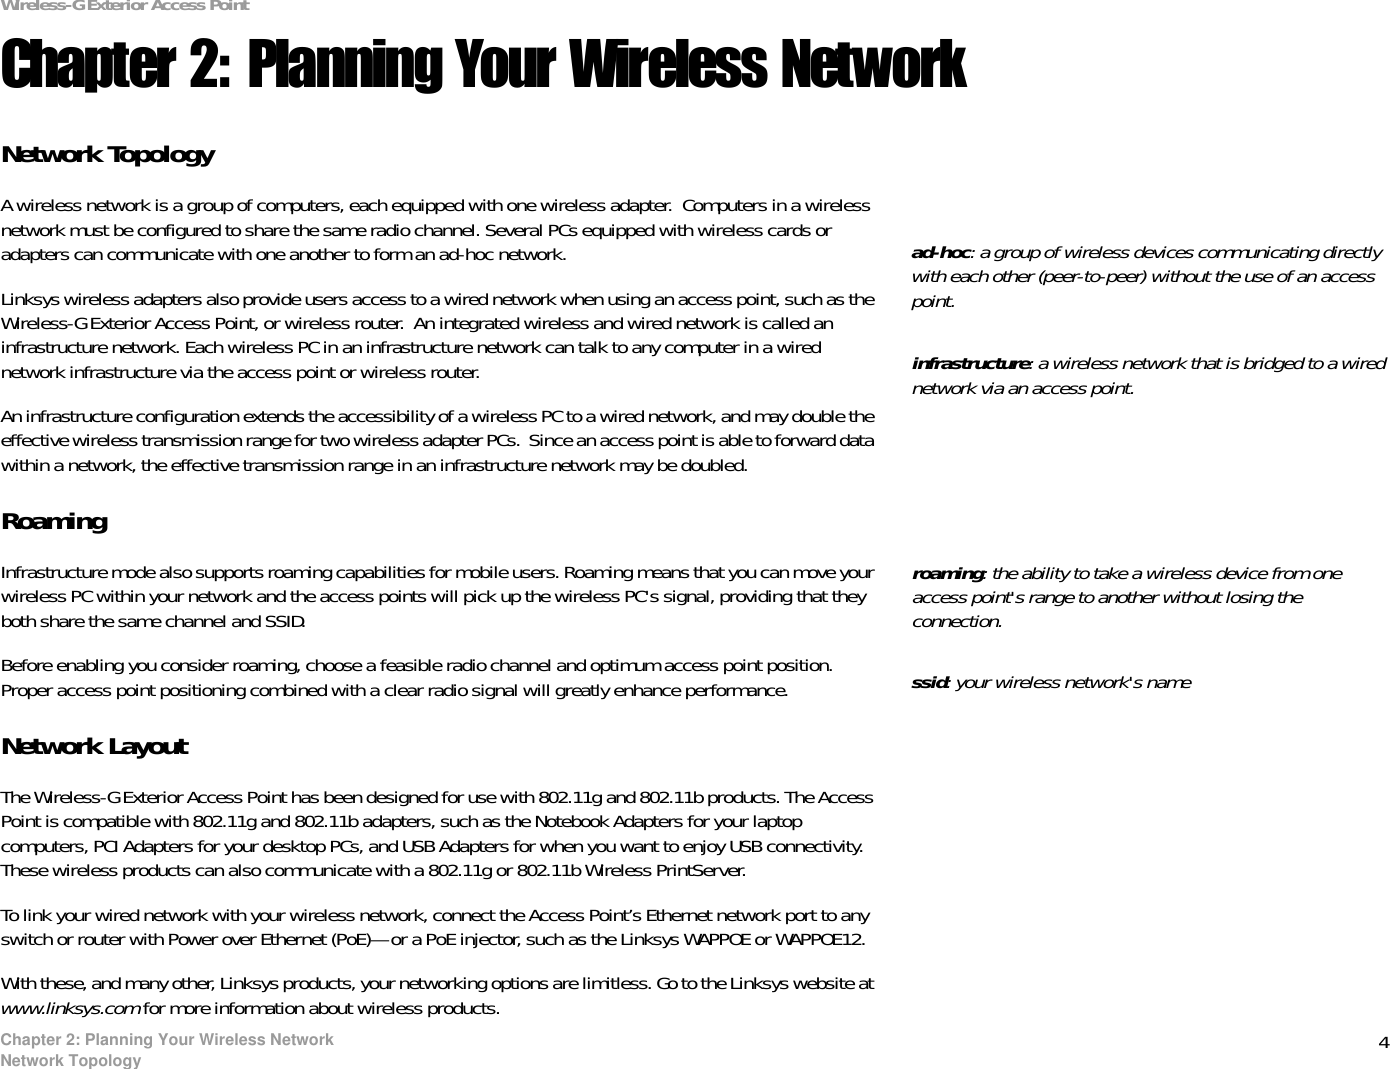 4Chapter 2: Planning Your Wireless NetworkNetwork TopologyWireless-G Exterior Access PointChapter 2: Planning Your Wireless NetworkNetwork TopologyA wireless network is a group of computers, each equipped with one wireless adapter.  Computers in a wireless network must be configured to share the same radio channel. Several PCs equipped with wireless cards or adapters can communicate with one another to form an ad-hoc network.Linksys wireless adapters also provide users access to a wired network when using an access point, such as the Wireless-G Exterior Access Point, or wireless router.  An integrated wireless and wired network is called an infrastructure network. Each wireless PC in an infrastructure network can talk to any computer in a wired network infrastructure via the access point or wireless router.An infrastructure configuration extends the accessibility of a wireless PC to a wired network, and may double the effective wireless transmission range for two wireless adapter PCs.  Since an access point is able to forward data within a network, the effective transmission range in an infrastructure network may be doubled.RoamingInfrastructure mode also supports roaming capabilities for mobile users. Roaming means that you can move your wireless PC within your network and the access points will pick up the wireless PC&apos;s signal, providing that they both share the same channel and SSID.Before enabling you consider roaming, choose a feasible radio channel and optimum access point position. Proper access point positioning combined with a clear radio signal will greatly enhance performance.Network LayoutThe Wireless-G Exterior Access Point has been designed for use with 802.11g and 802.11b products. The Access Point is compatible with 802.11g and 802.11b adapters, such as the Notebook Adapters for your laptop computers, PCI Adapters for your desktop PCs, and USB Adapters for when you want to enjoy USB connectivity. These wireless products can also communicate with a 802.11g or 802.11b Wireless PrintServer.To link your wired network with your wireless network, connect the Access Point’s Ethernet network port to any switch or router with Power over Ethernet (PoE)—or a PoE injector, such as the Linksys WAPPOE or WAPPOE12.With these, and many other, Linksys products, your networking options are limitless. Go to the Linksys website at www.linksys.com for more information about wireless products.infrastructure: a wireless network that is bridged to a wired network via an access point.ad-hoc: a group of wireless devices communicating directly with each other (peer-to-peer) without the use of an access point.roaming: the ability to take a wireless device from one access point&apos;s range to another without losing the connection.ssid: your wireless network&apos;s name